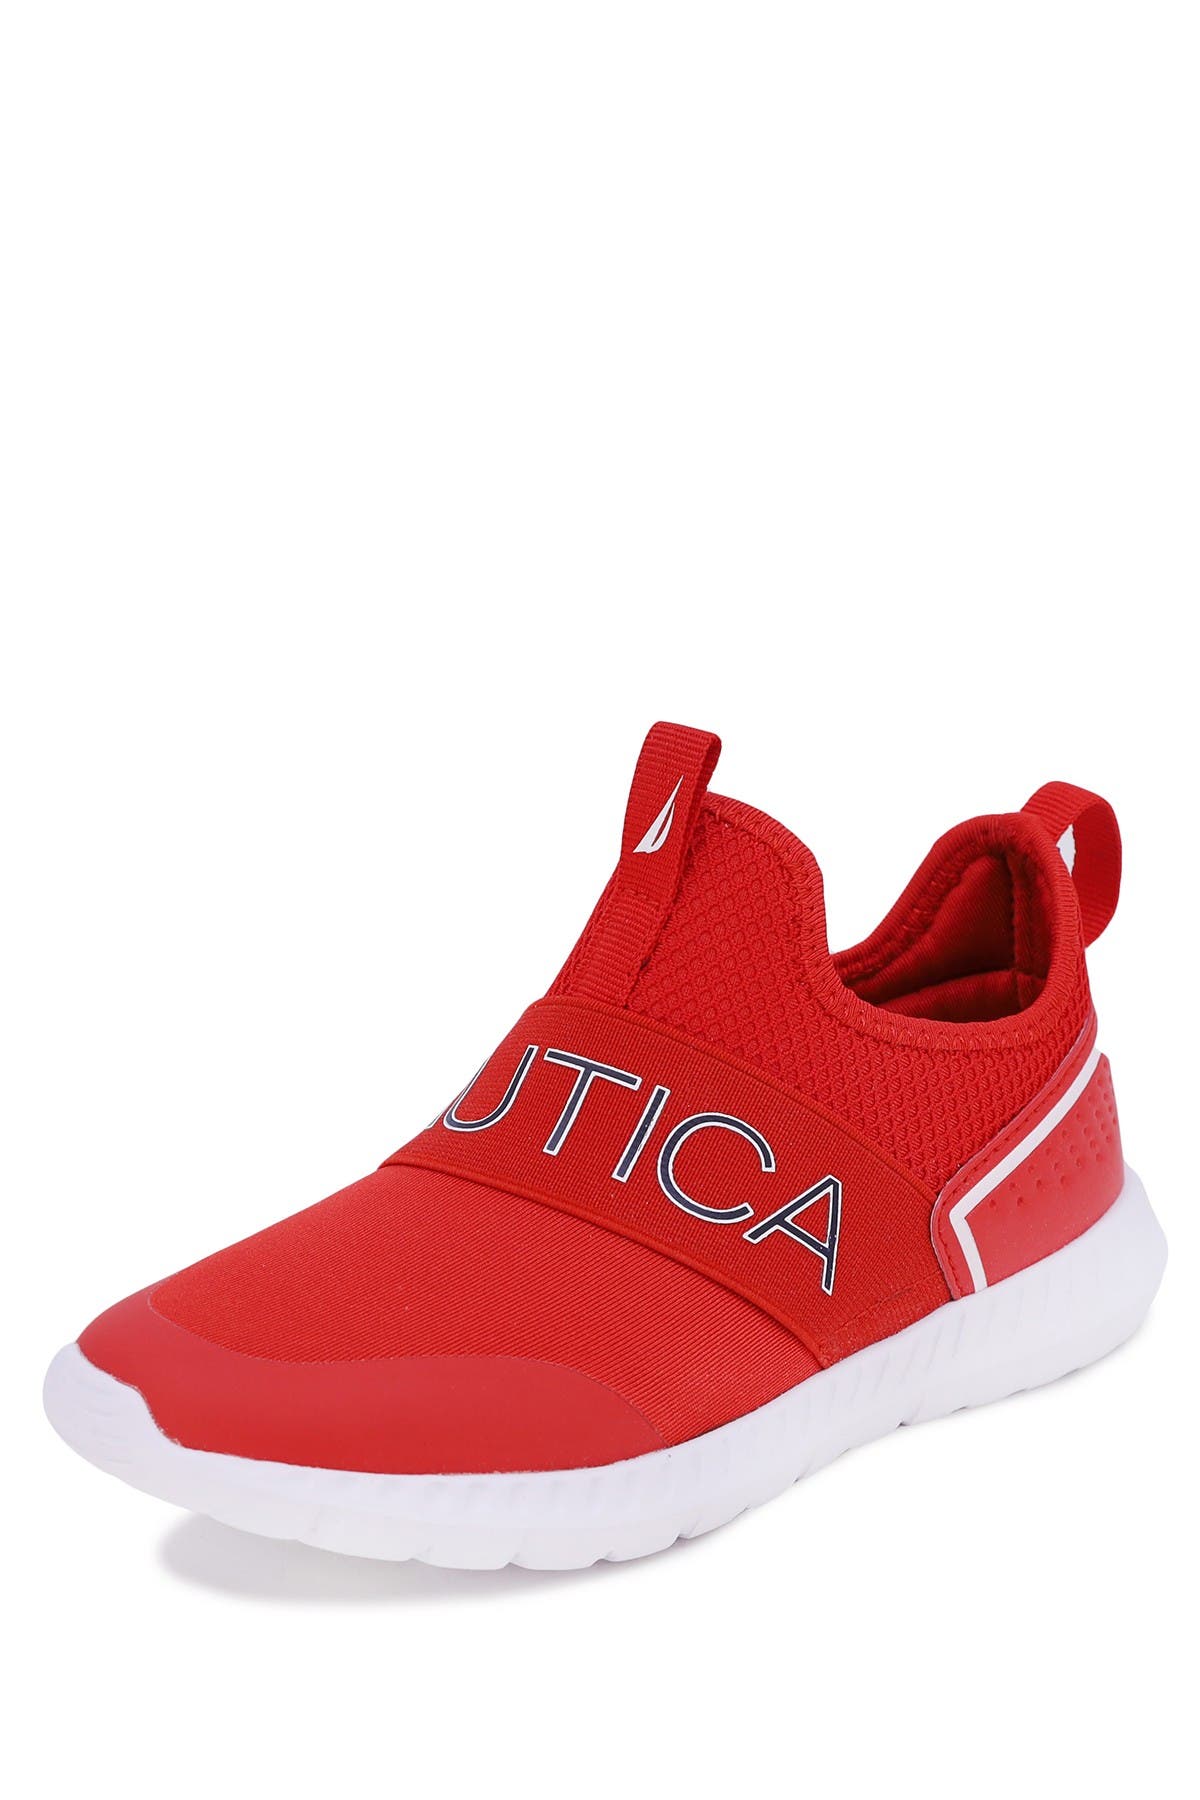 nautica shoes for toddlers